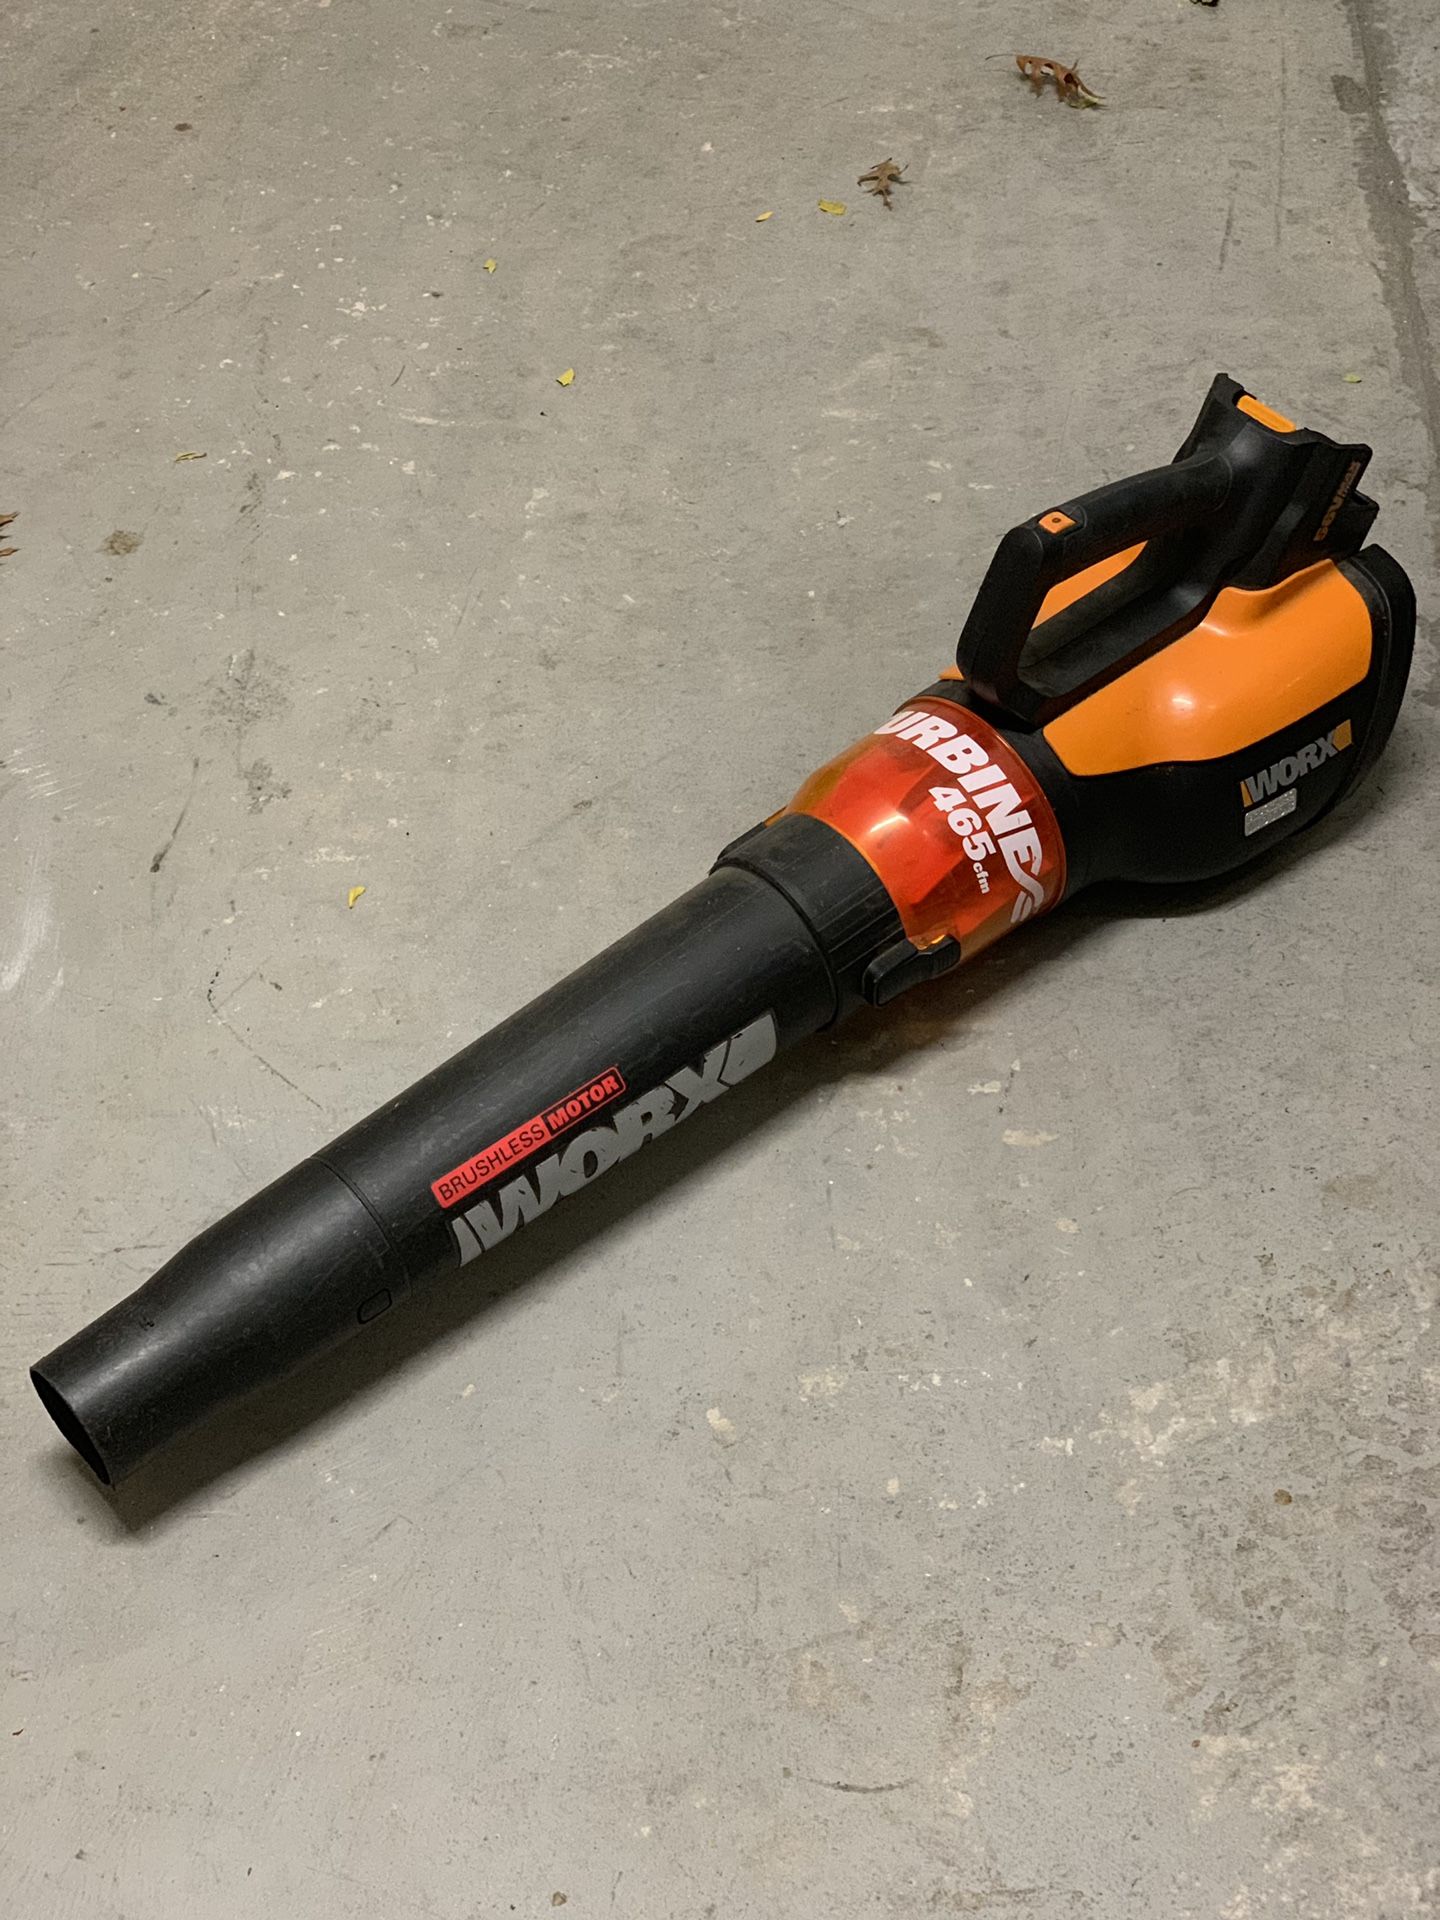 Used Worx WG591 56V Cordless Leaf Blower tool only